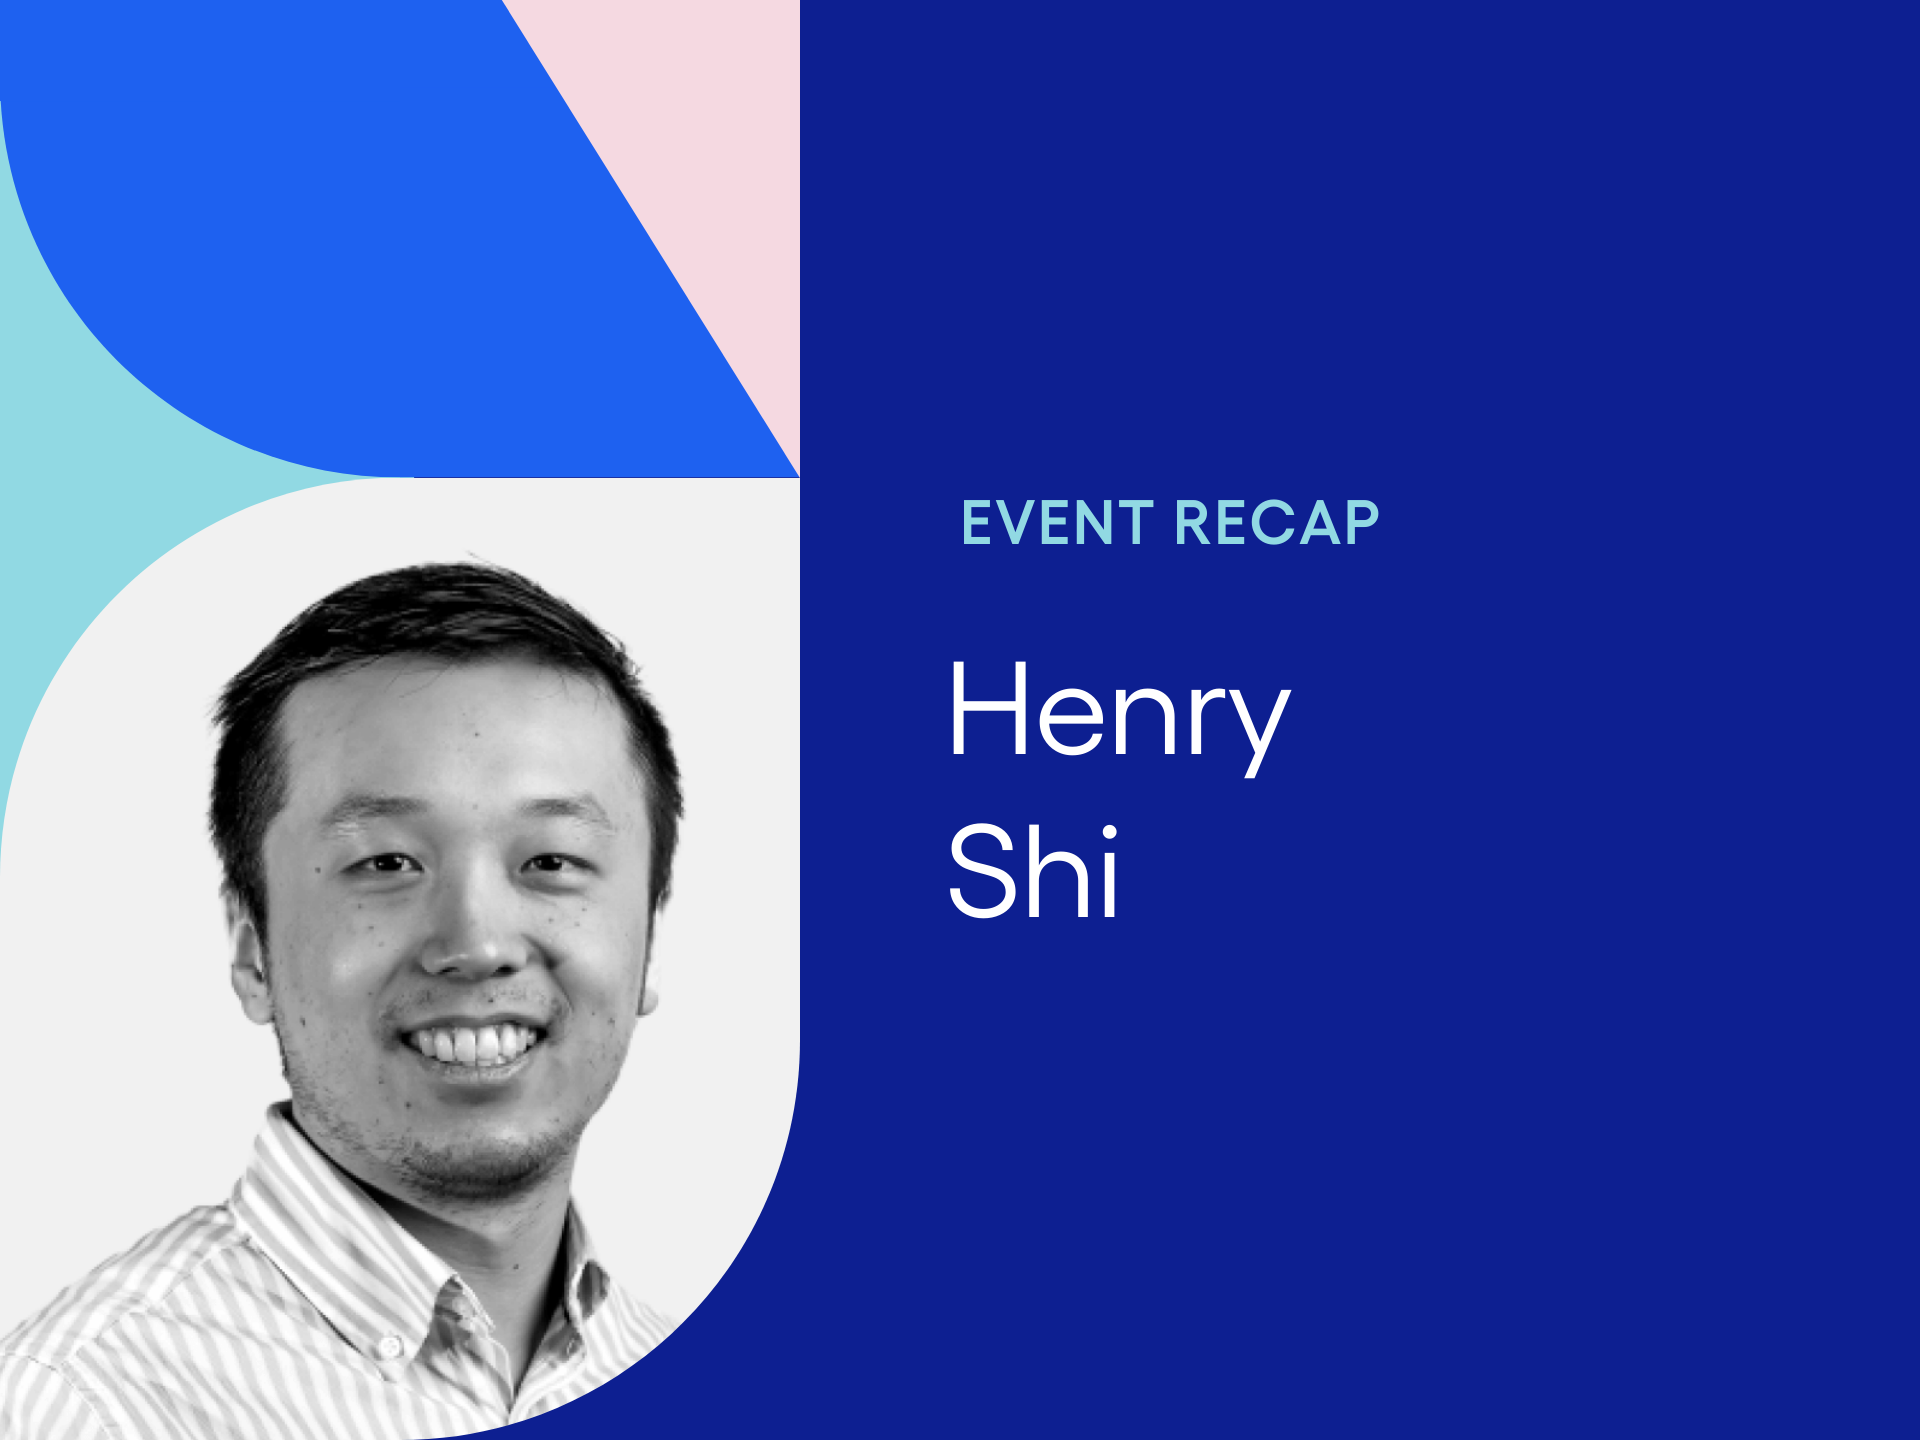 An image representing Henry Shi, Co-founder of Super.com